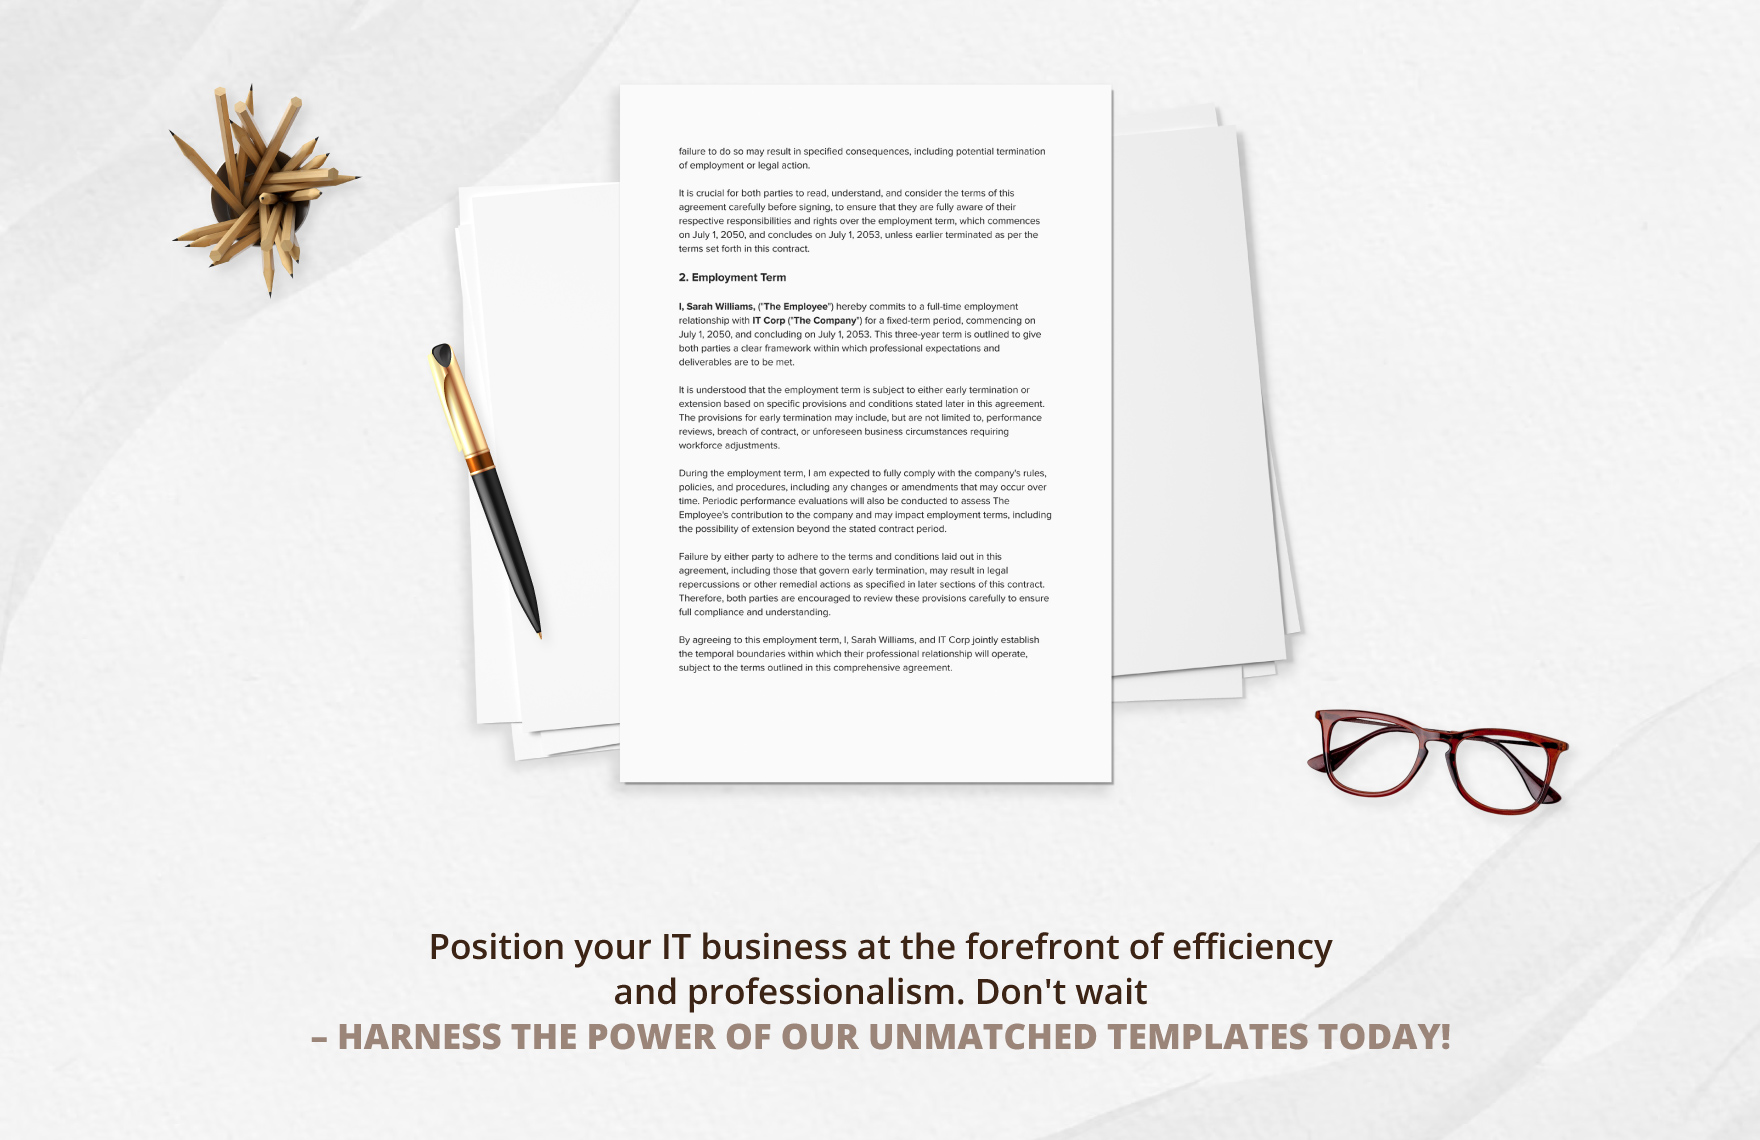 IT Staff Contract Agreement Template